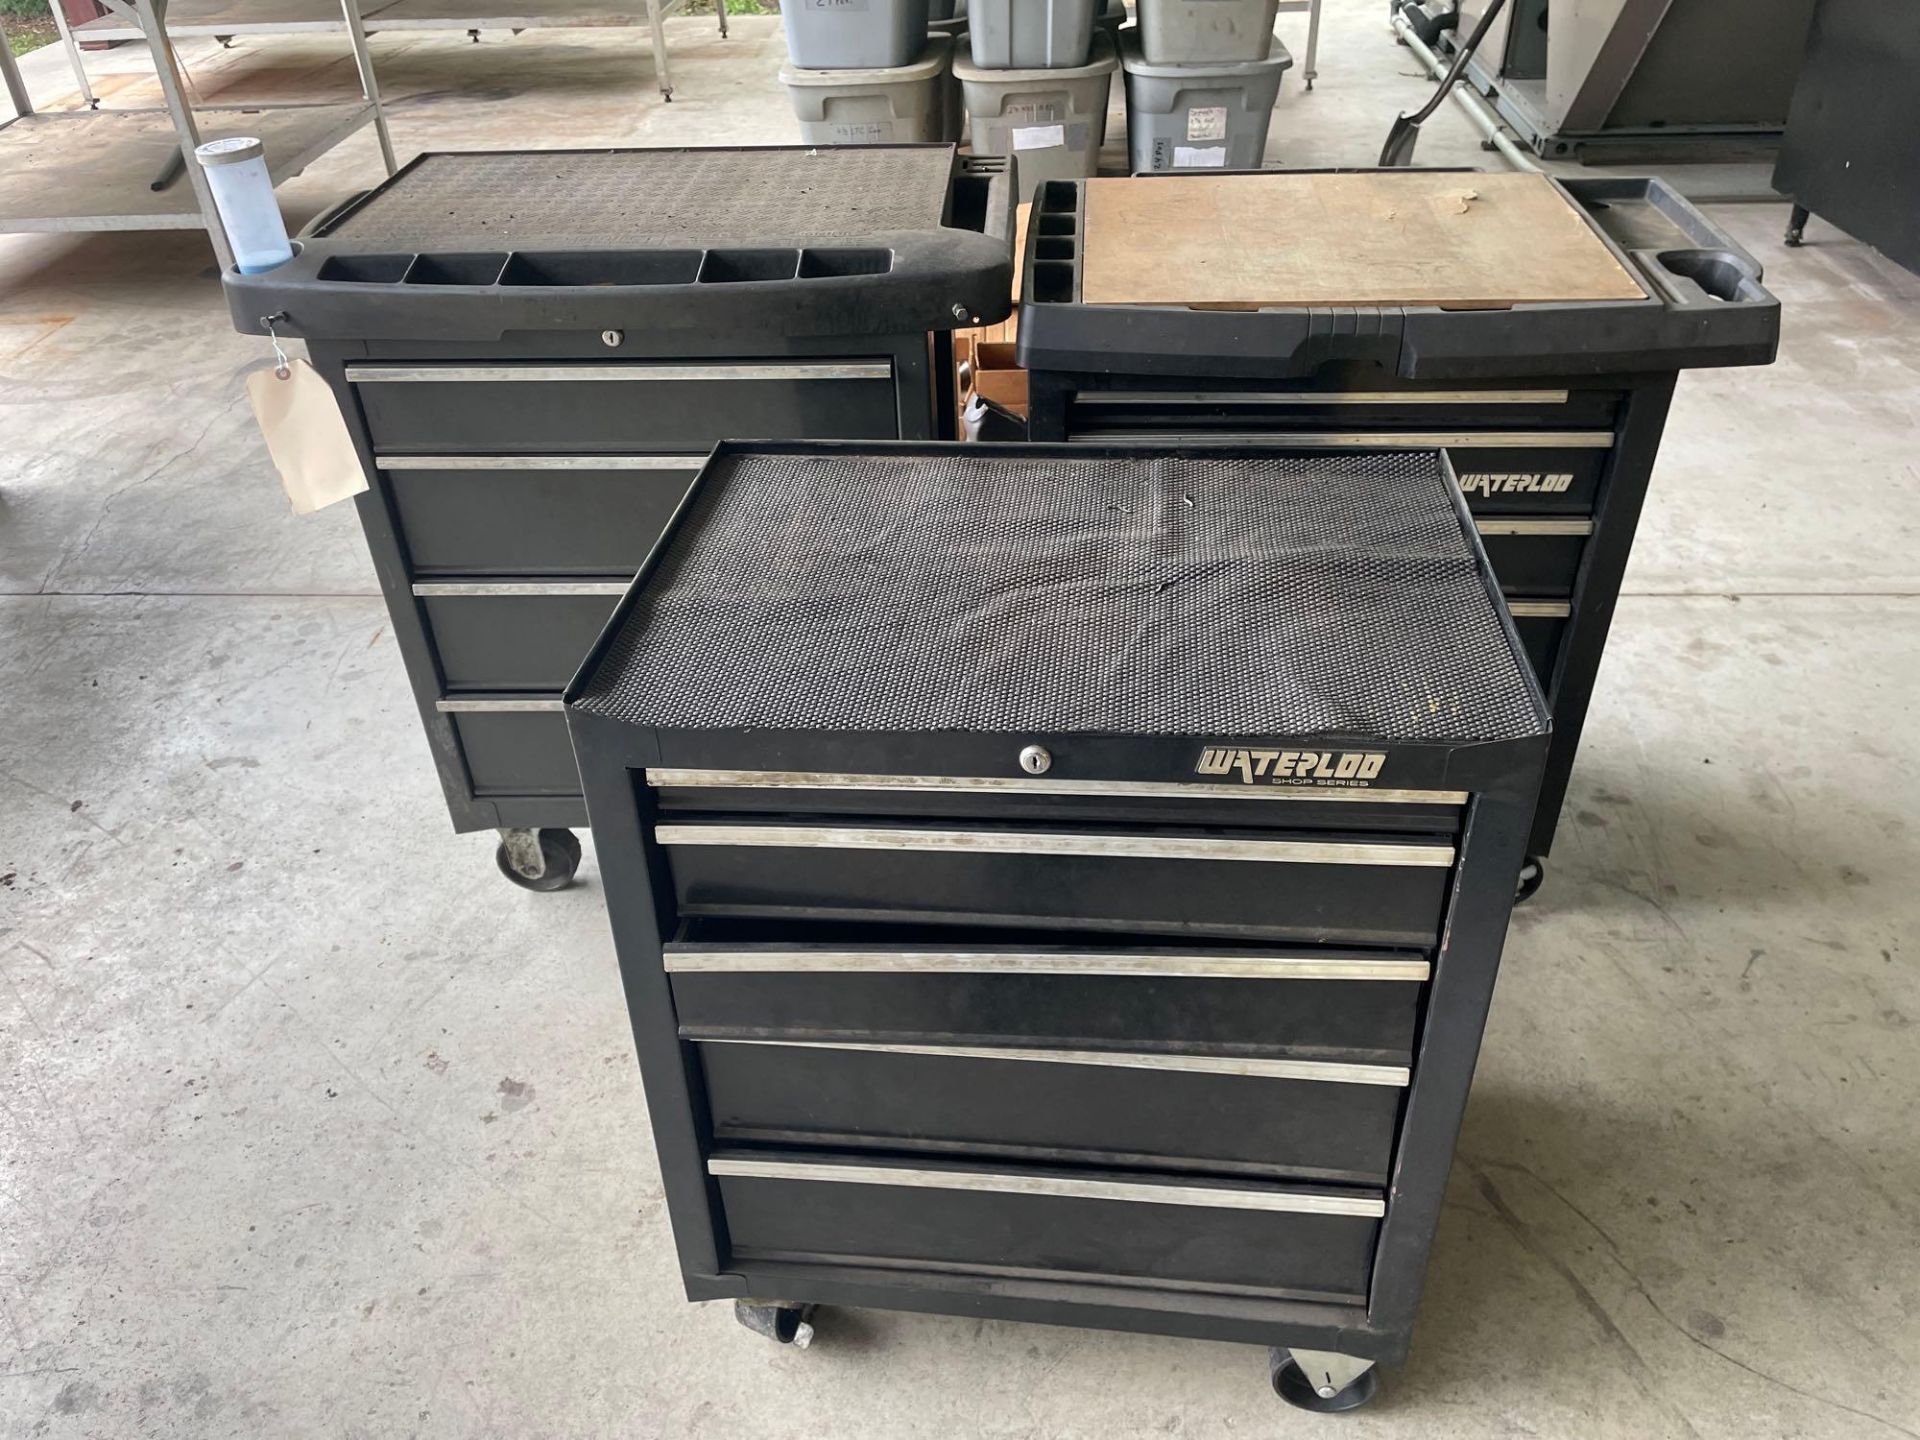 Lot of 3: Waterloo Tool Box’s on Casters